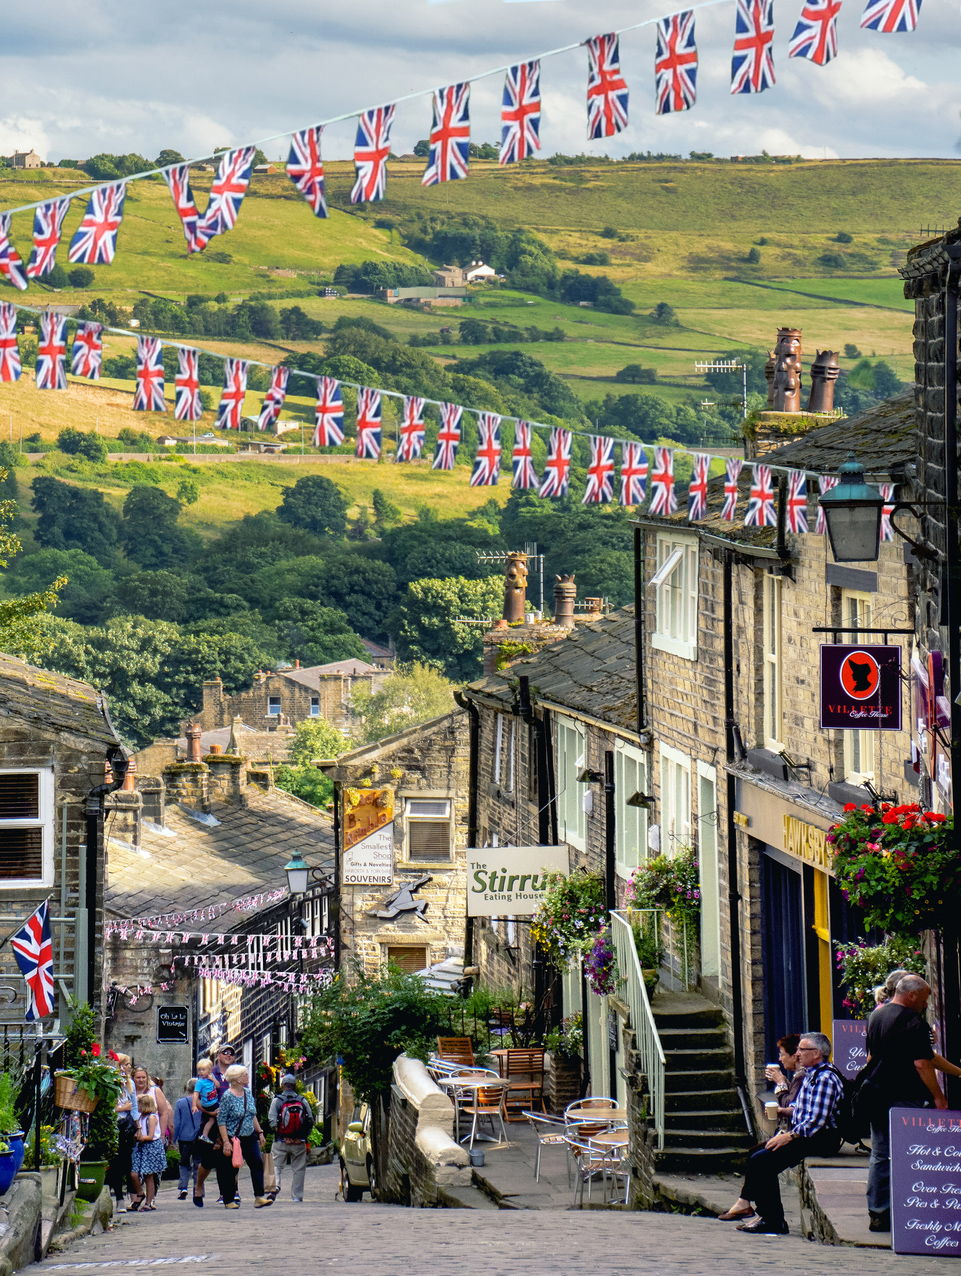 View down the cobbled hill in the village of Haworth, West Yorkshire, England.